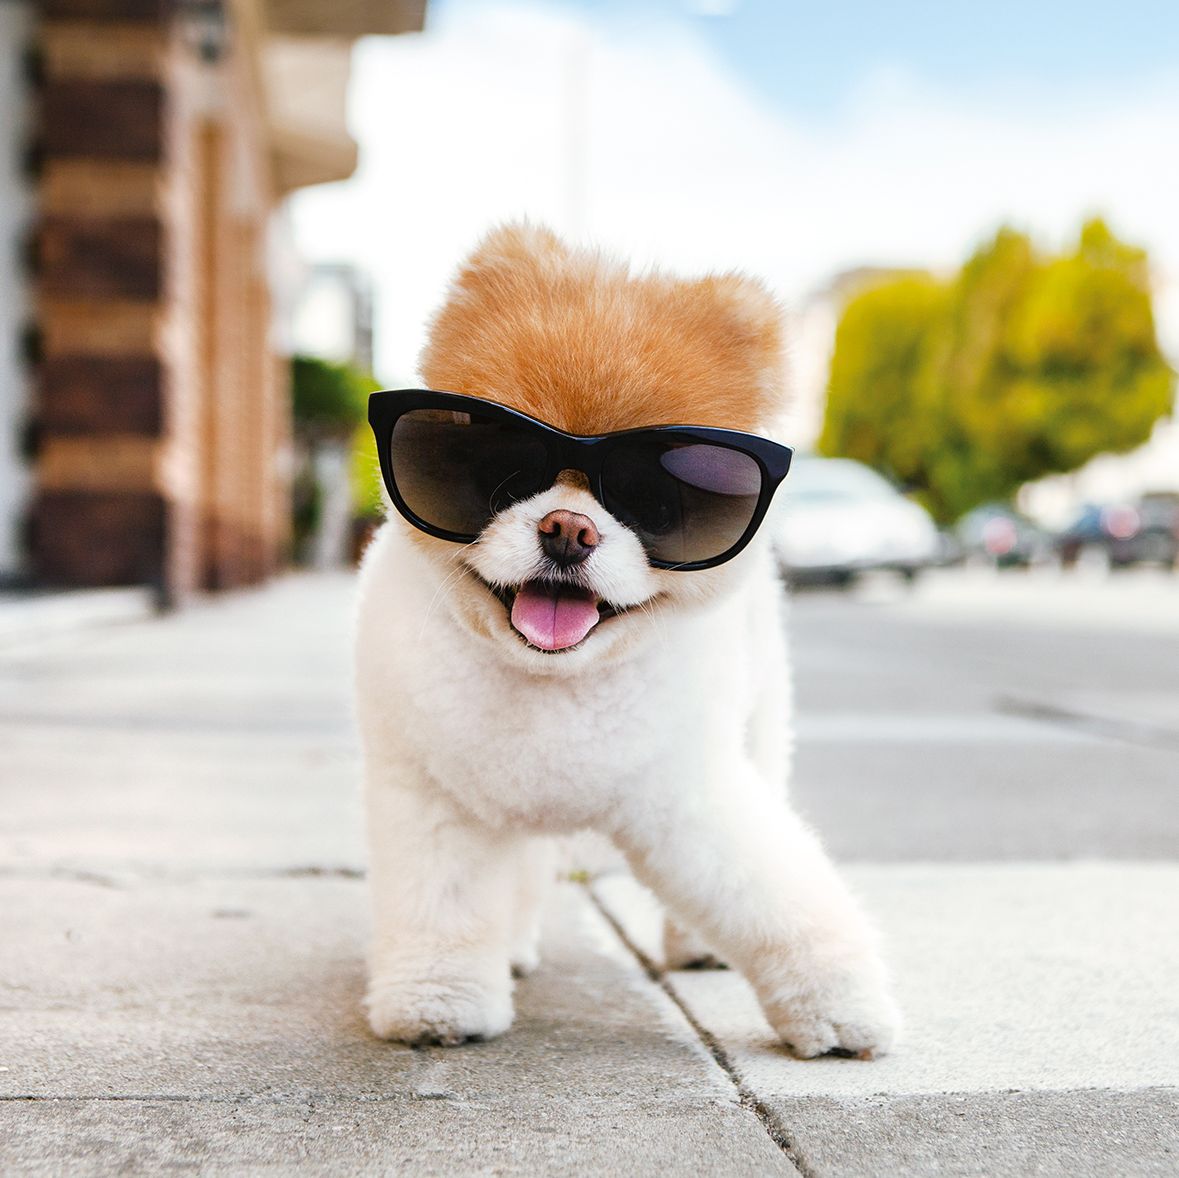 Boo the Pomeranian smiles for a pet portrait with sunglasses.